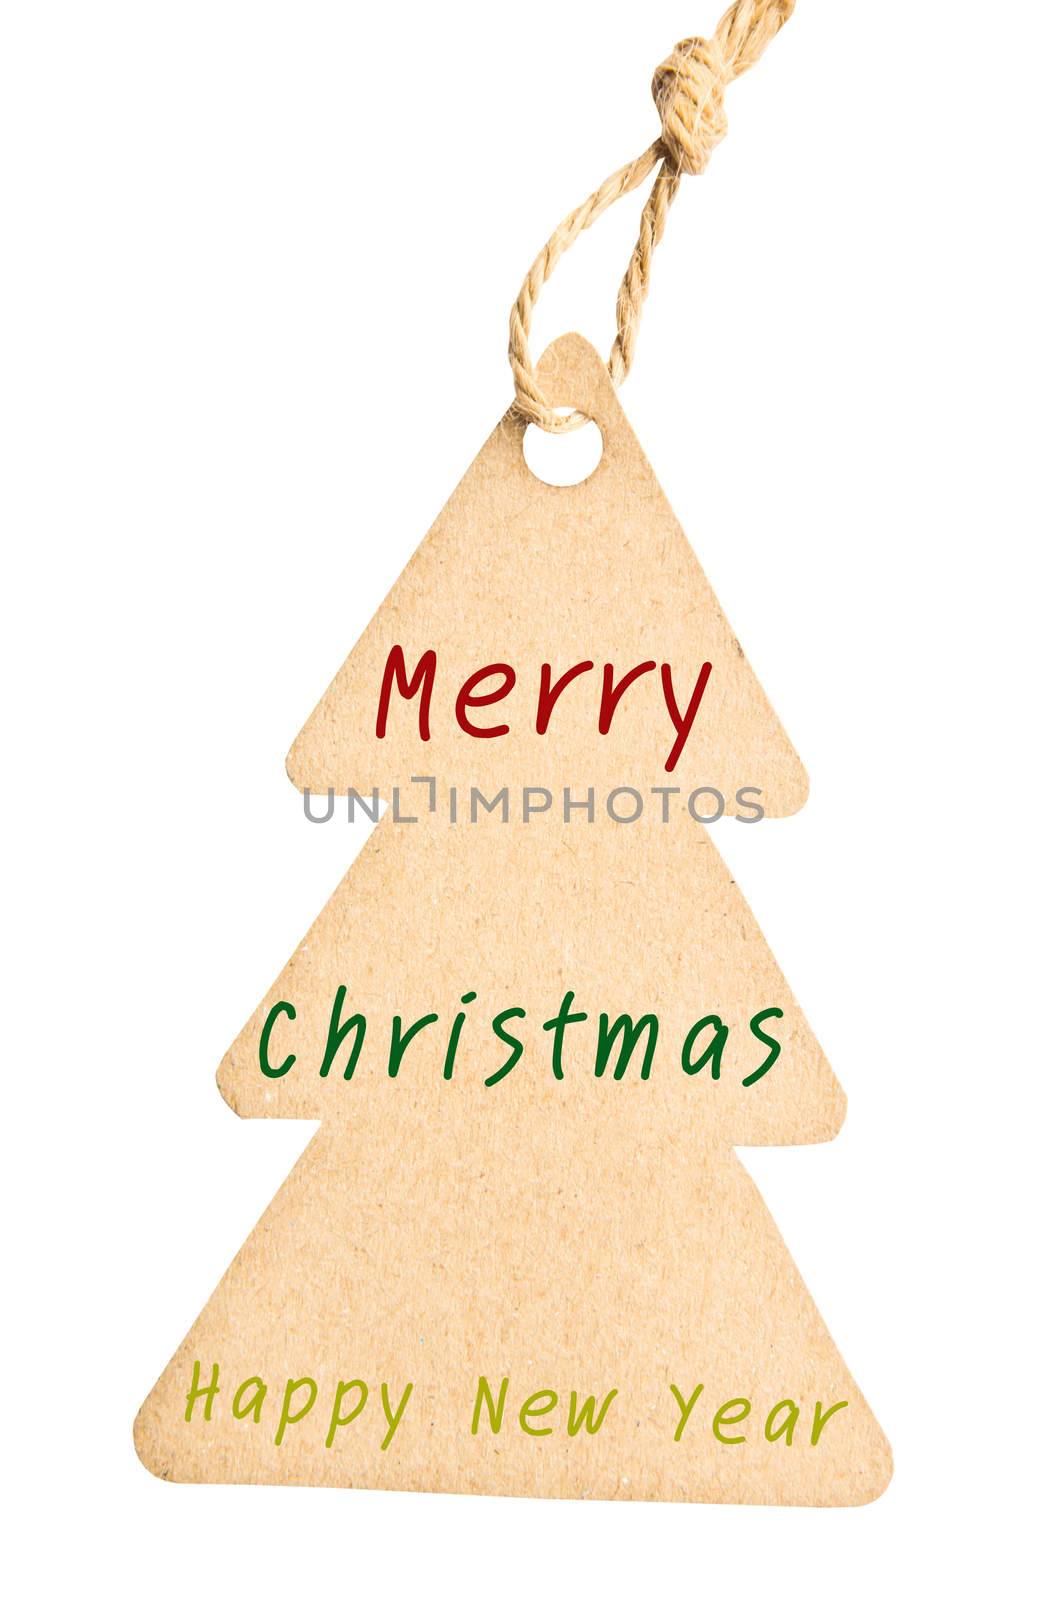 Merry christmas and Happy new year on Blank tag by Gamjai